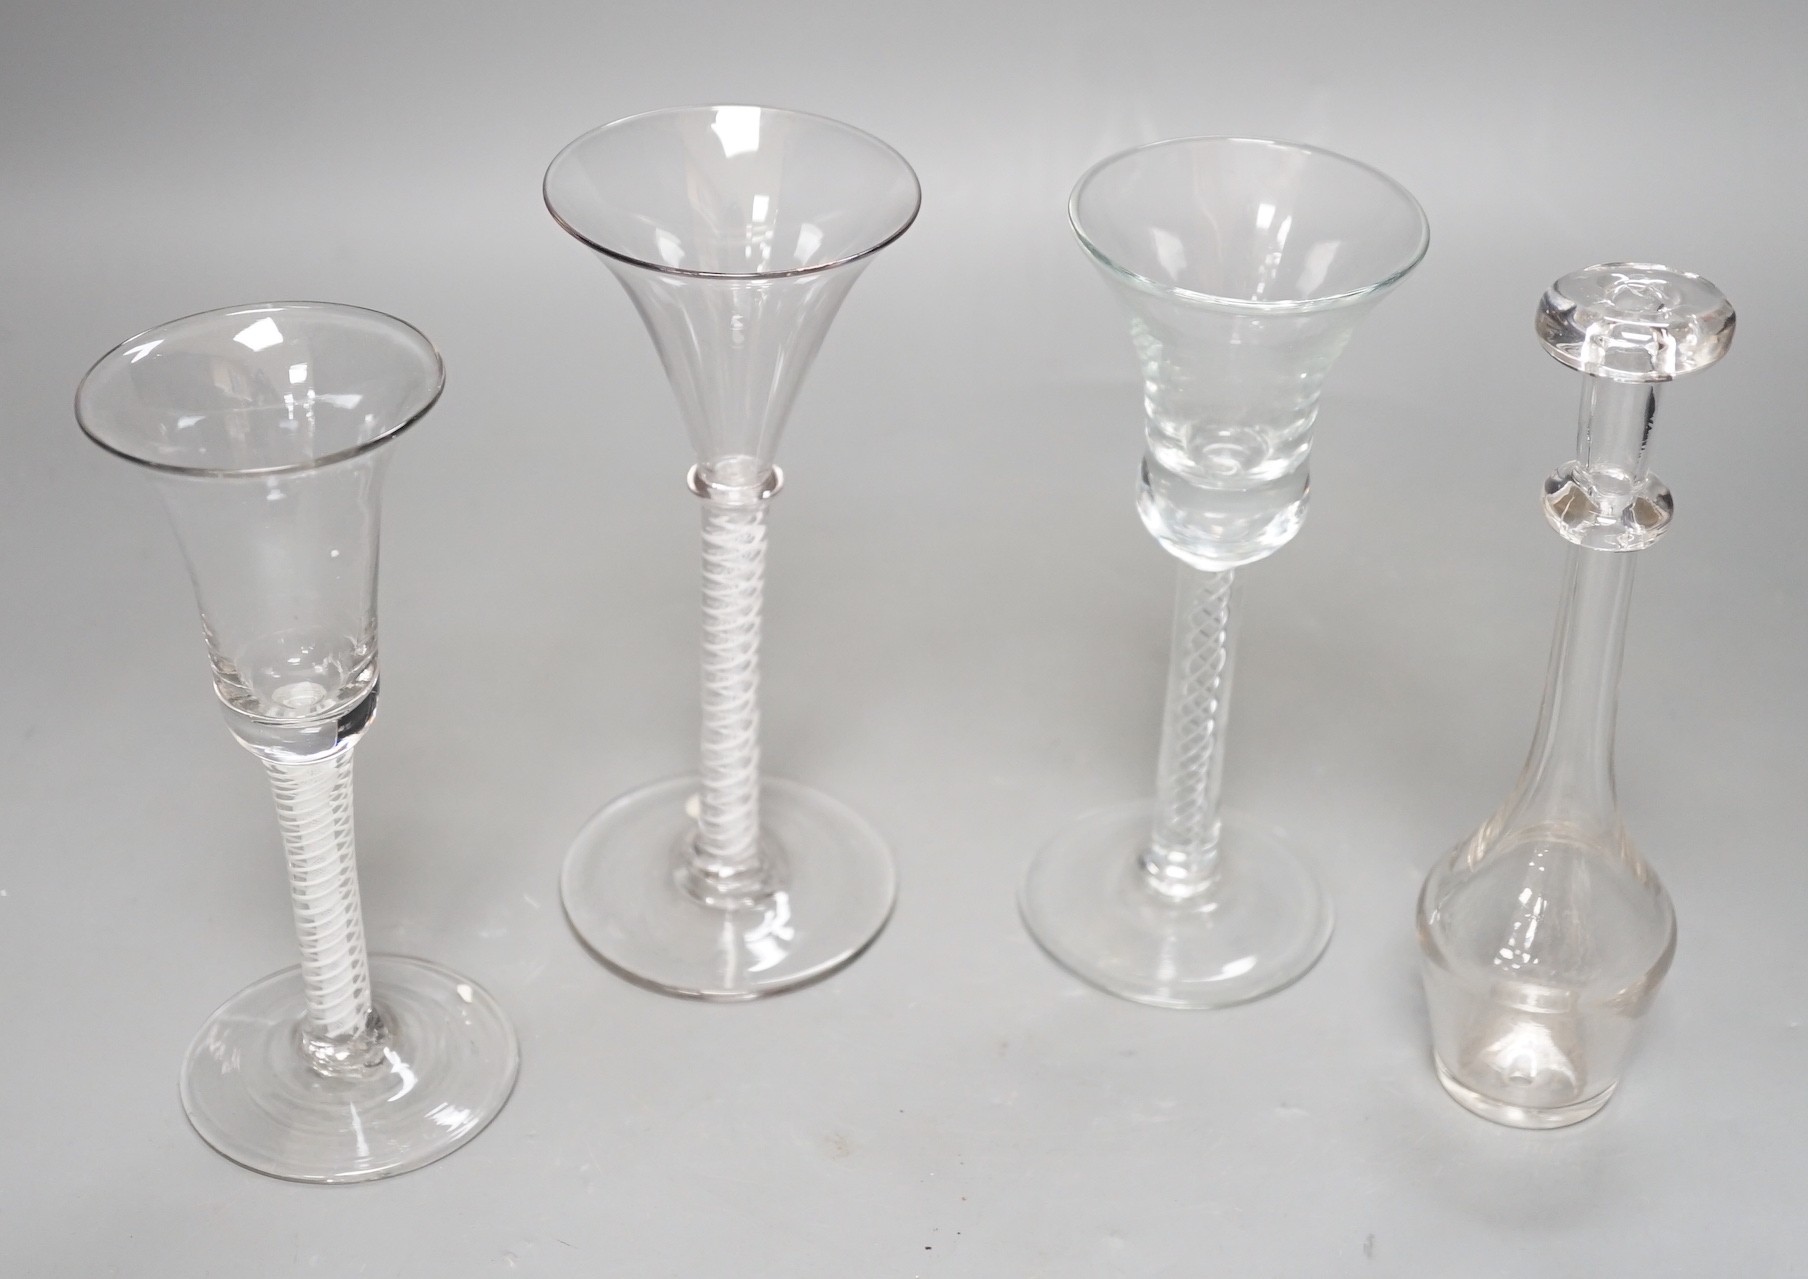 Three opaque or airtwist stem drinking glasses together with a Toddy lifter - 18cm high